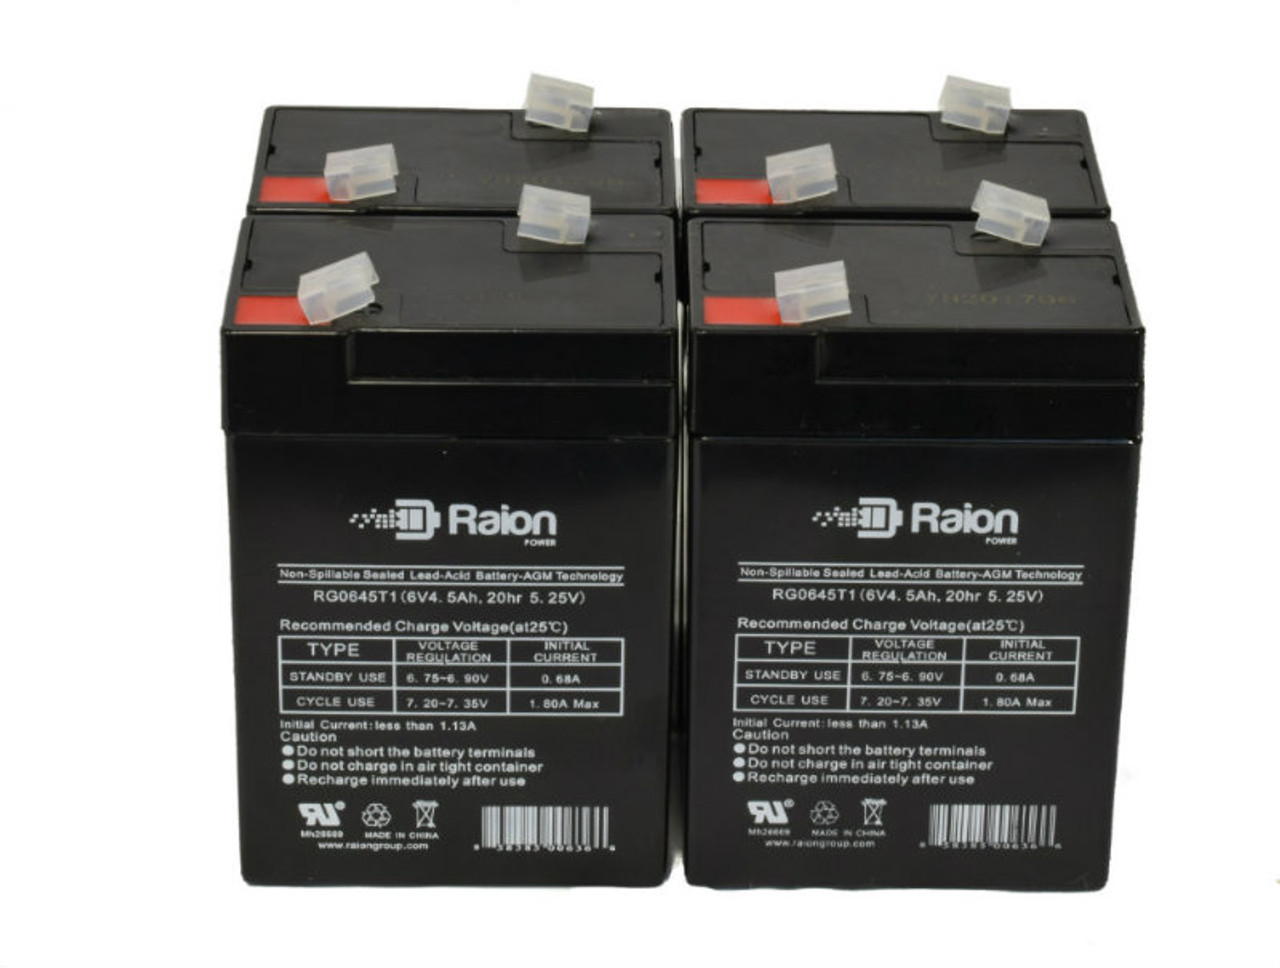 Raion Power 6 Volt 4.5Ah RG0645T1 Replacement Battery for Duramp NP4-6 - 4 Pack